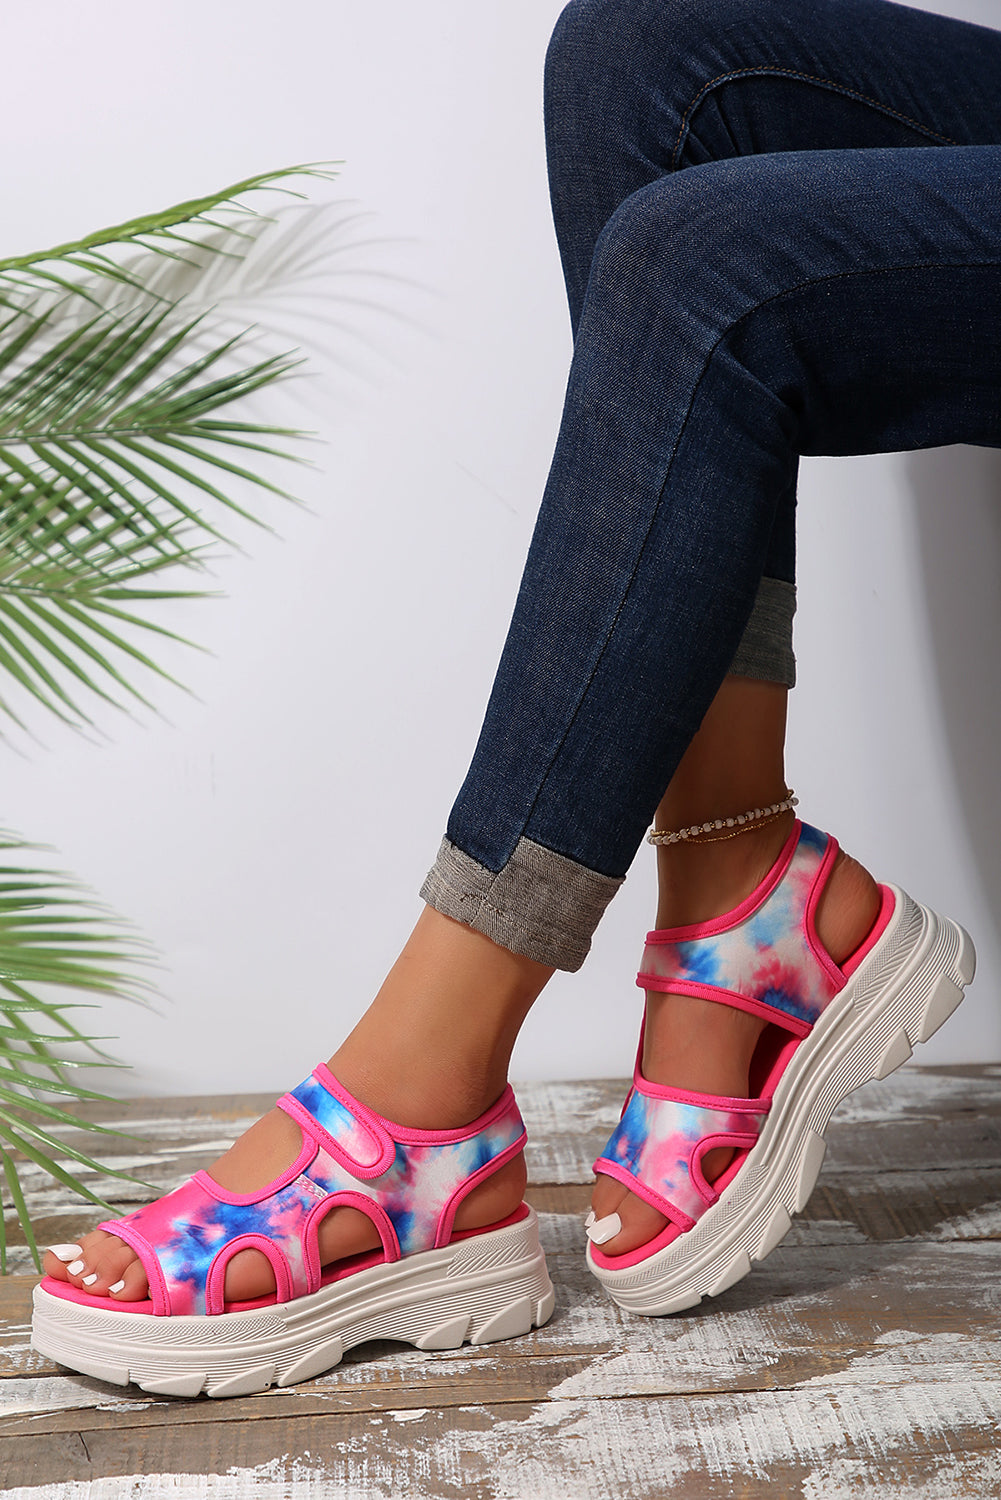 Strawberry Pink Tie Dye Print Hollow Out Platform Sandals - Bellisima Clothing Collective